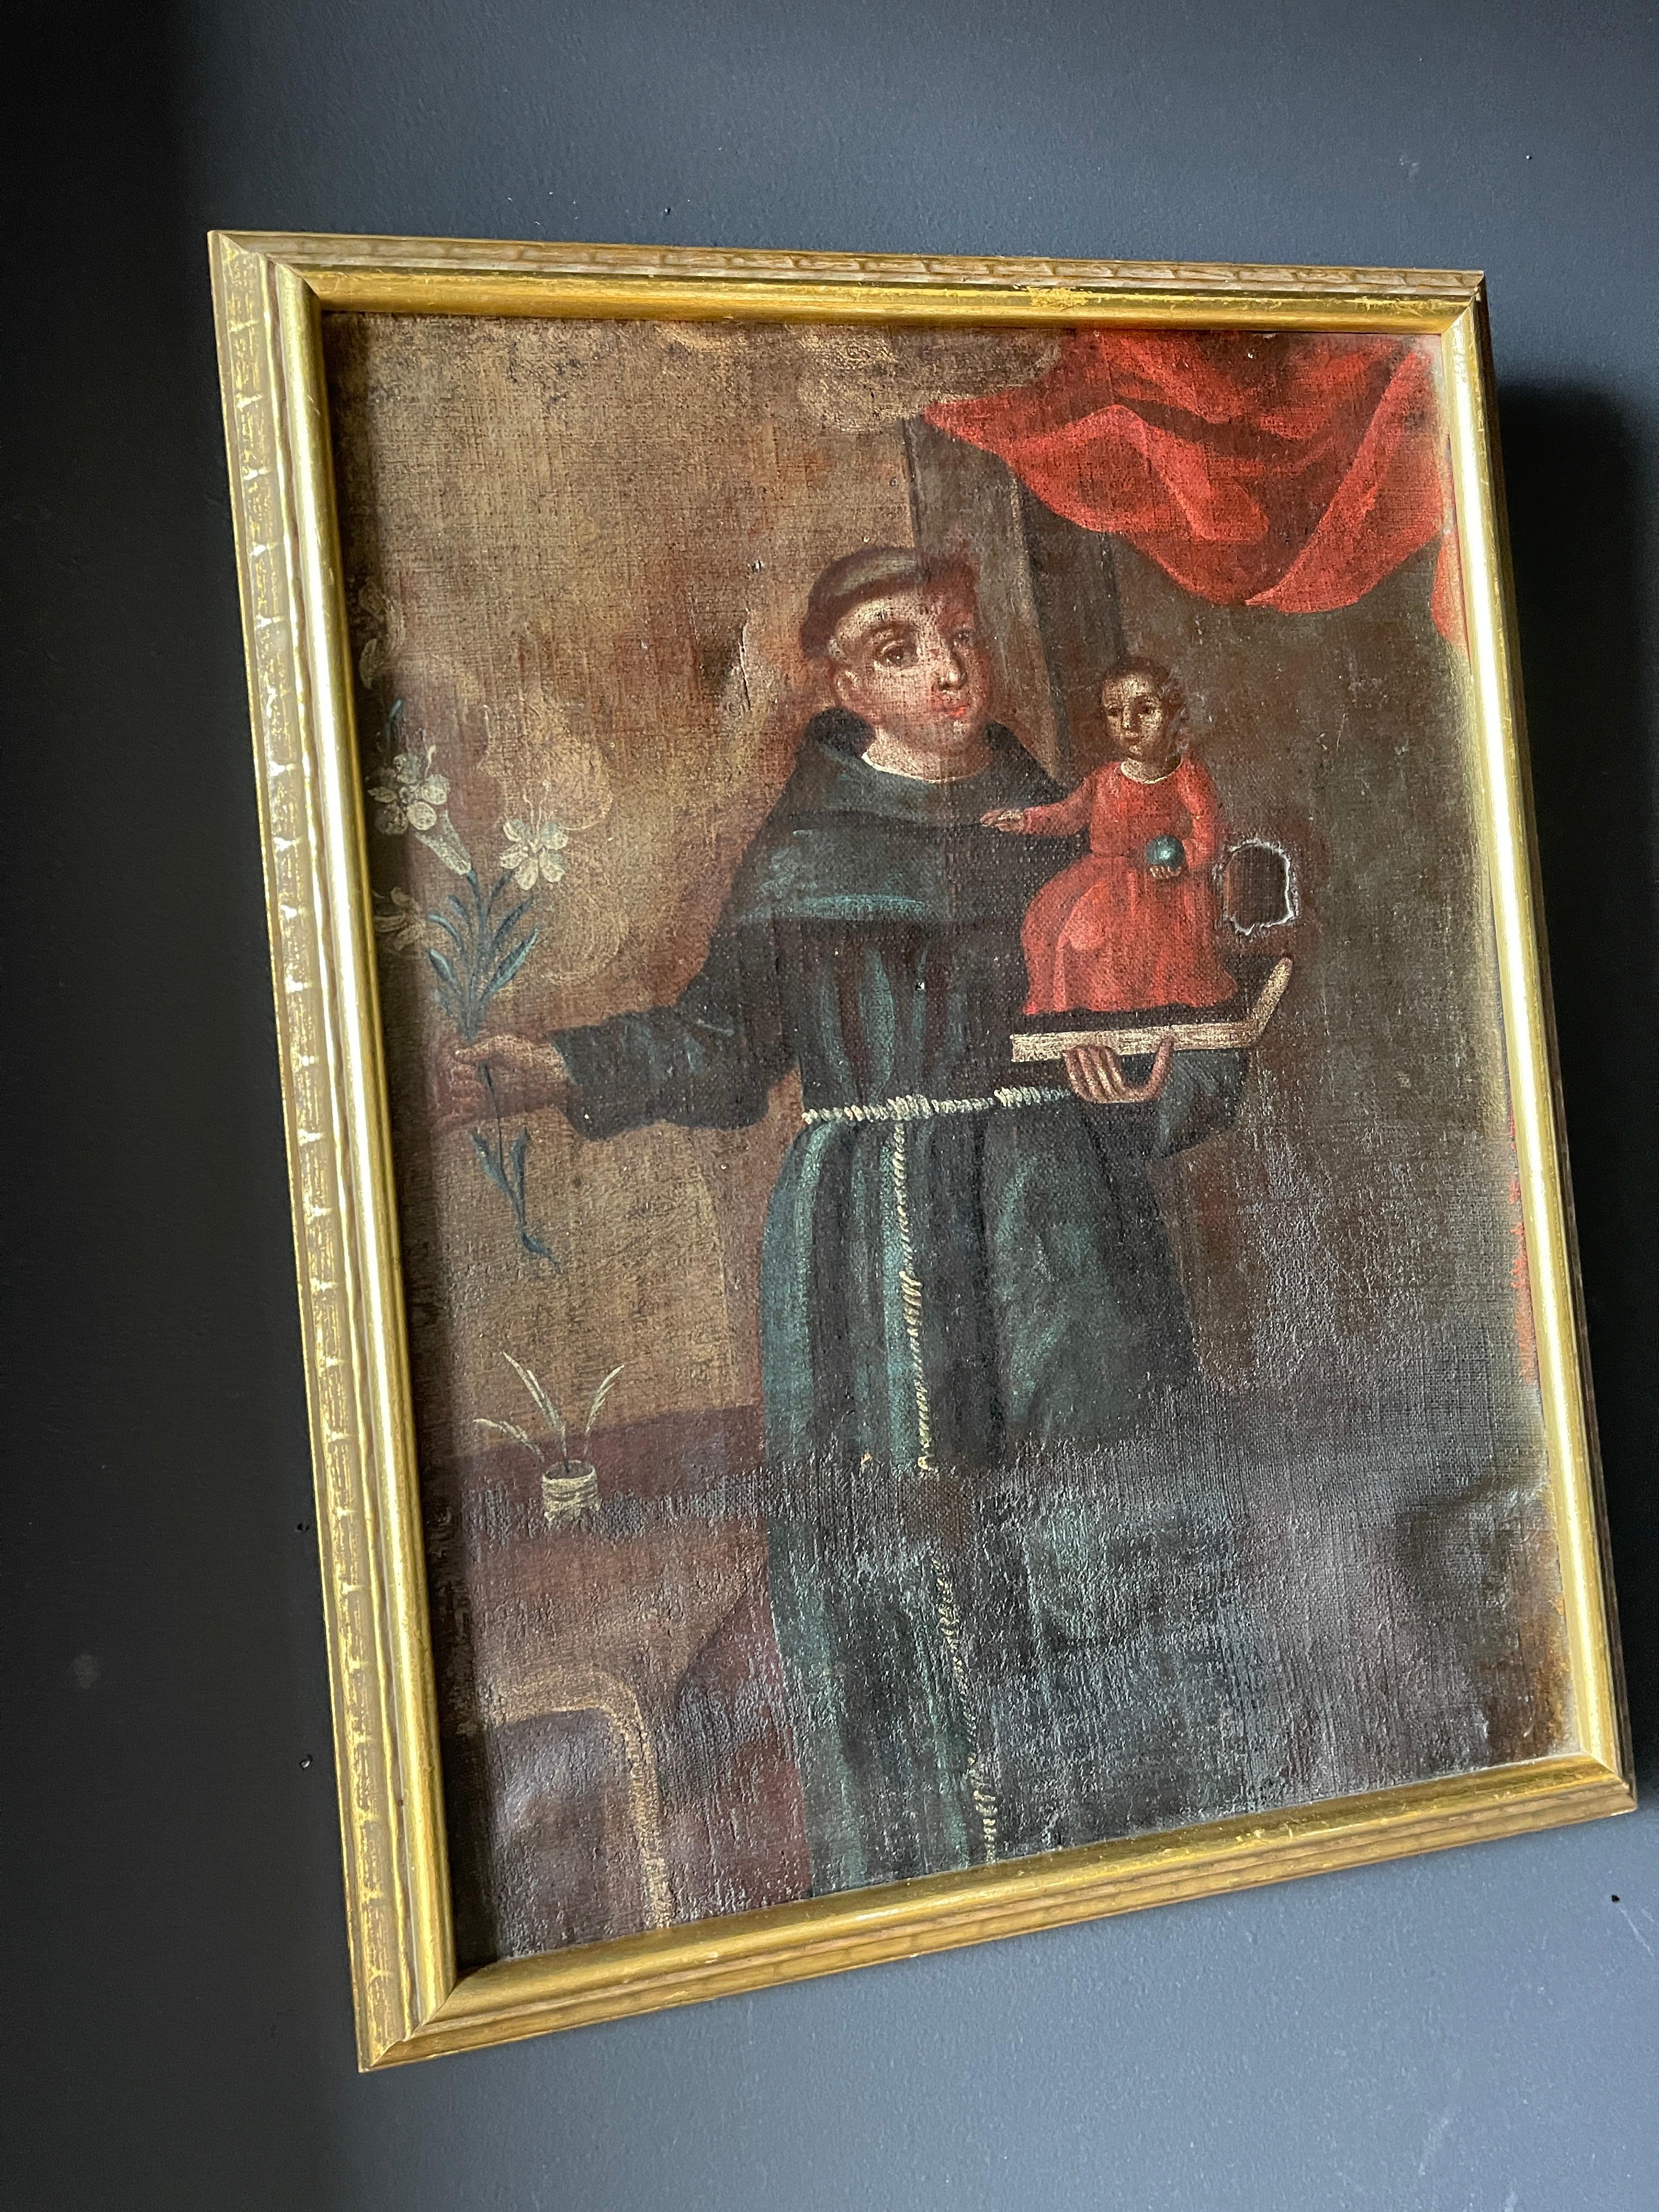 Beautiful 18th century Spanish colonial oil on canvas painting of Saint Anthony with the infant Jesus. There are a few old repairs as shown on photos. Framed with gilt wood frame.

.Saint Anthony of Padua was born and raised by a wealthy family in